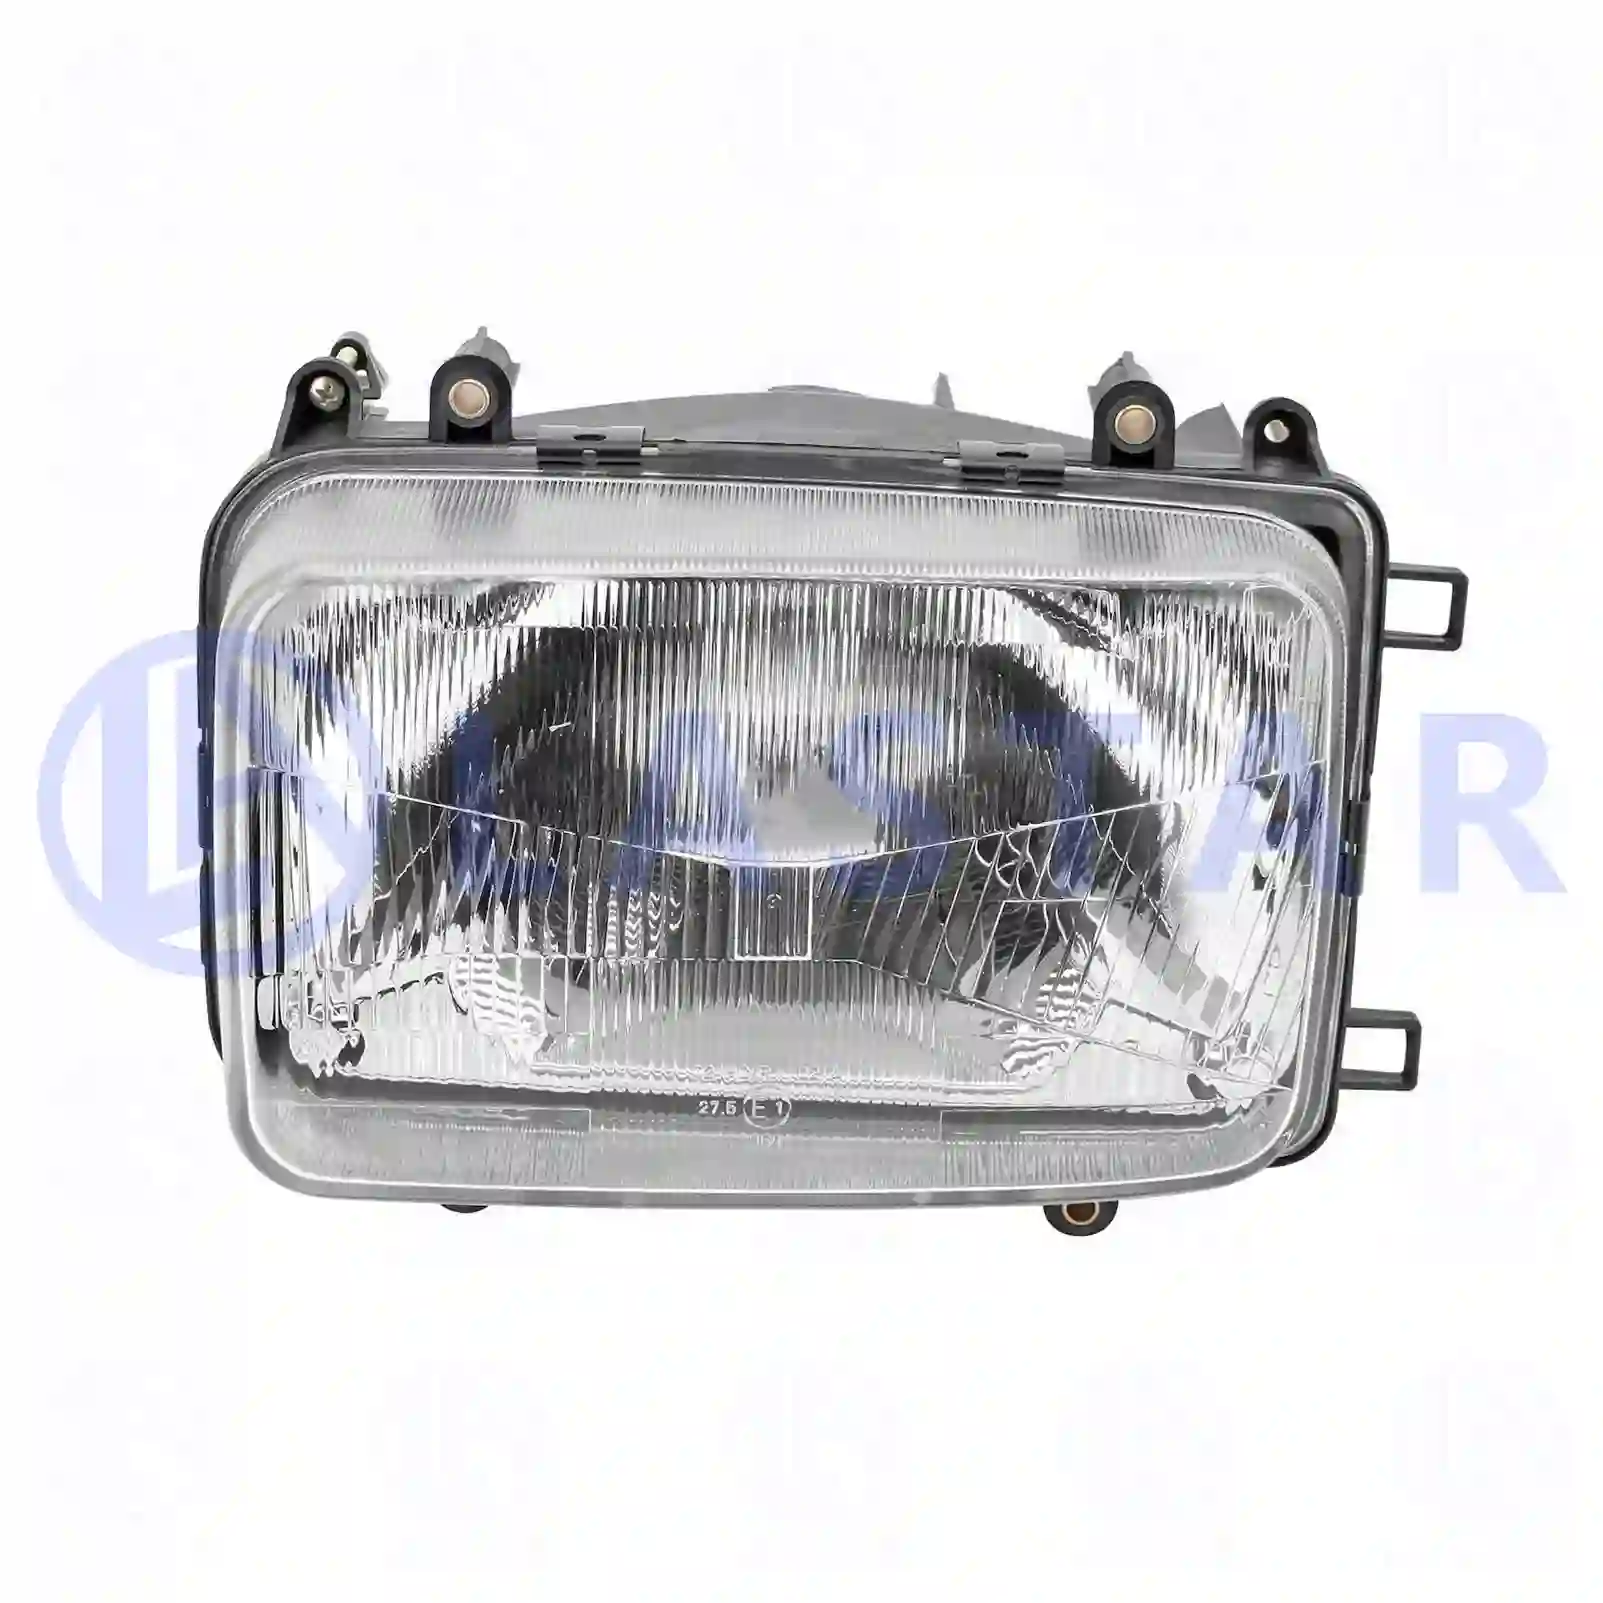 Headlamp, left, without bulbs, 77712554, 1227608, 1283231, 1293368, ZG20484-0008, ||  77712554 Lastar Spare Part | Truck Spare Parts, Auotomotive Spare Parts Headlamp, left, without bulbs, 77712554, 1227608, 1283231, 1293368, ZG20484-0008, ||  77712554 Lastar Spare Part | Truck Spare Parts, Auotomotive Spare Parts